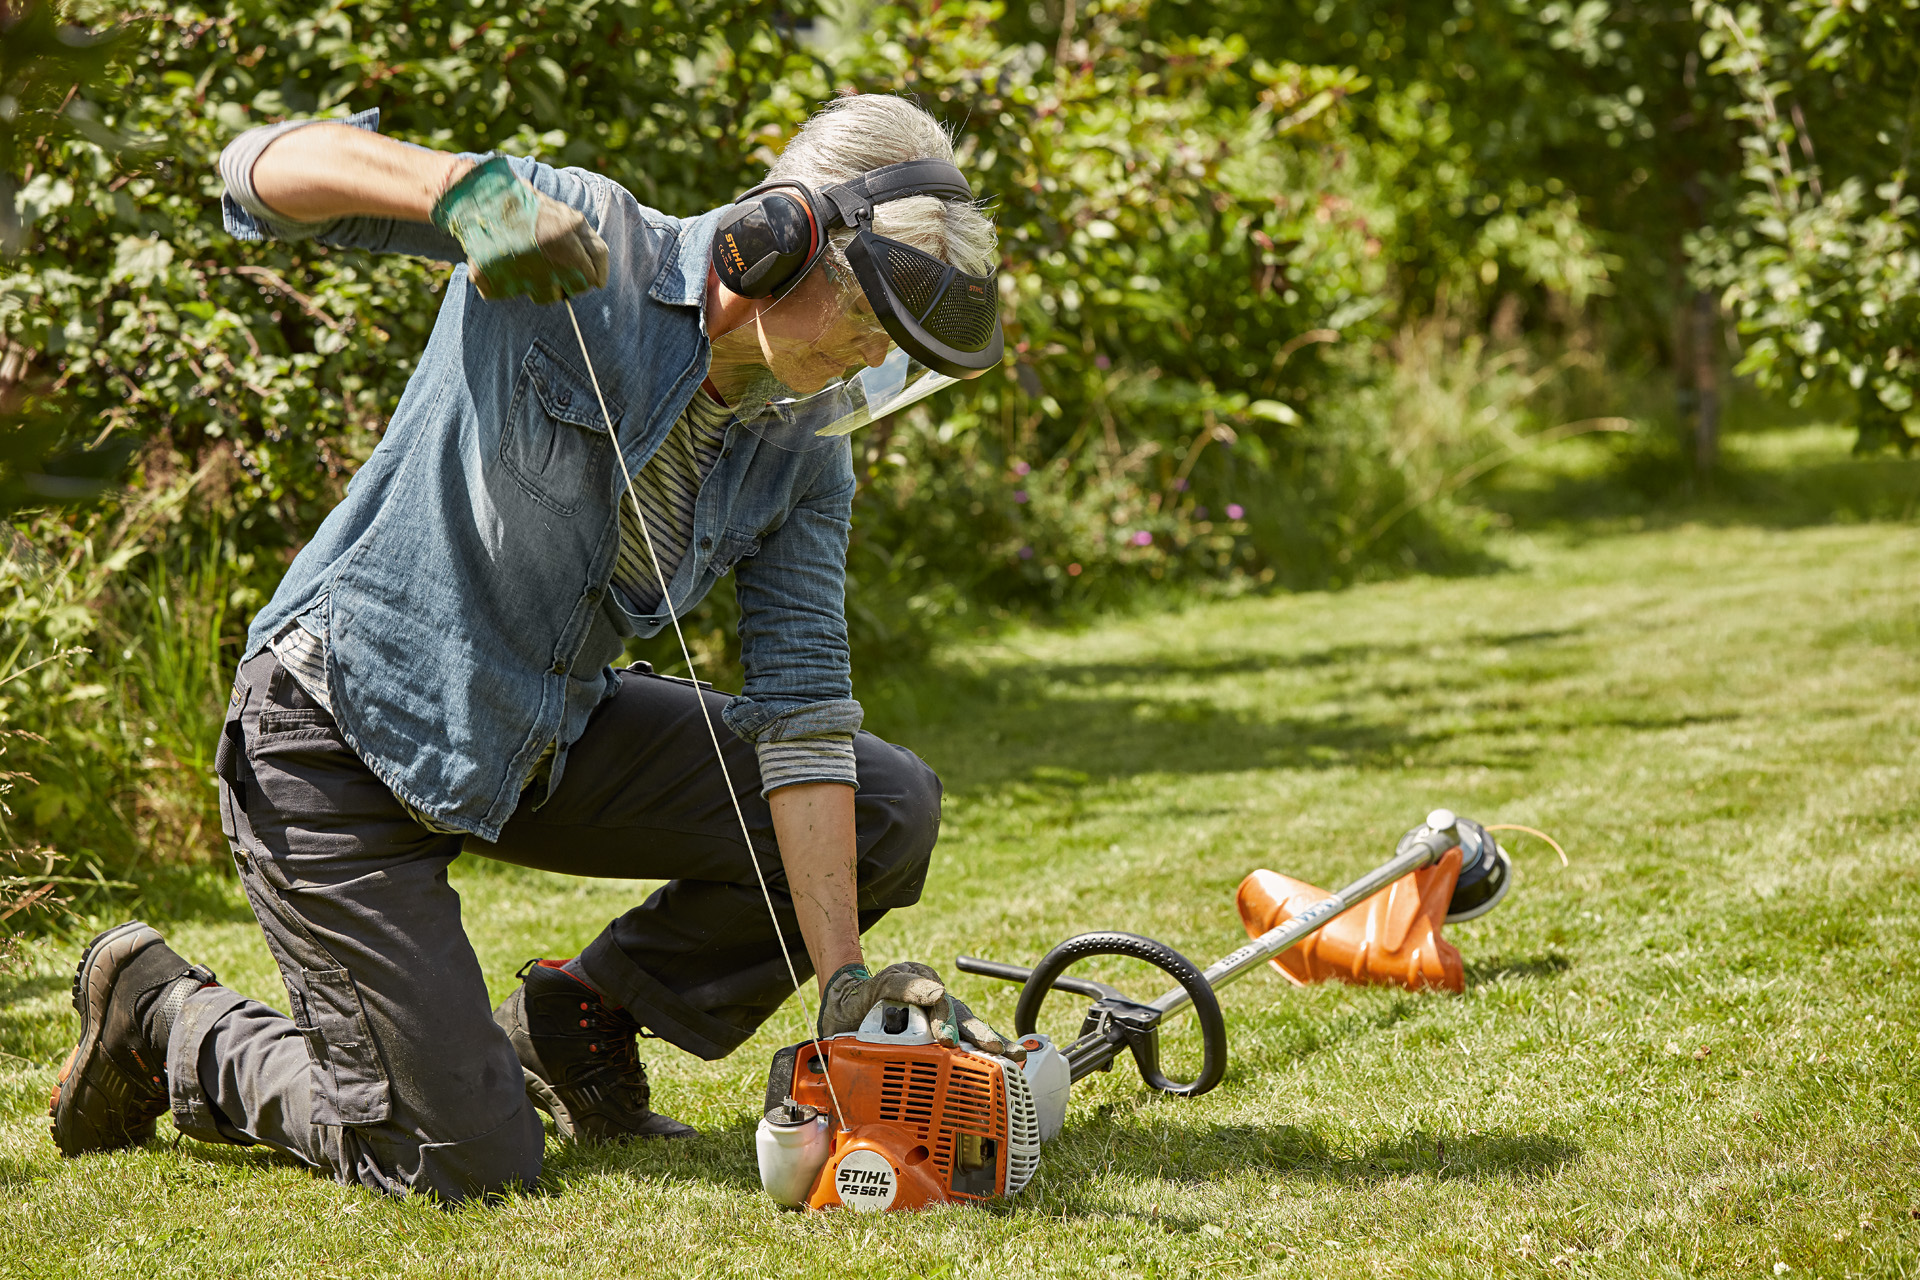 A person wearing ear and face protection starting a STIHL FS 56 R petrol grass trimmer on a garden lawn